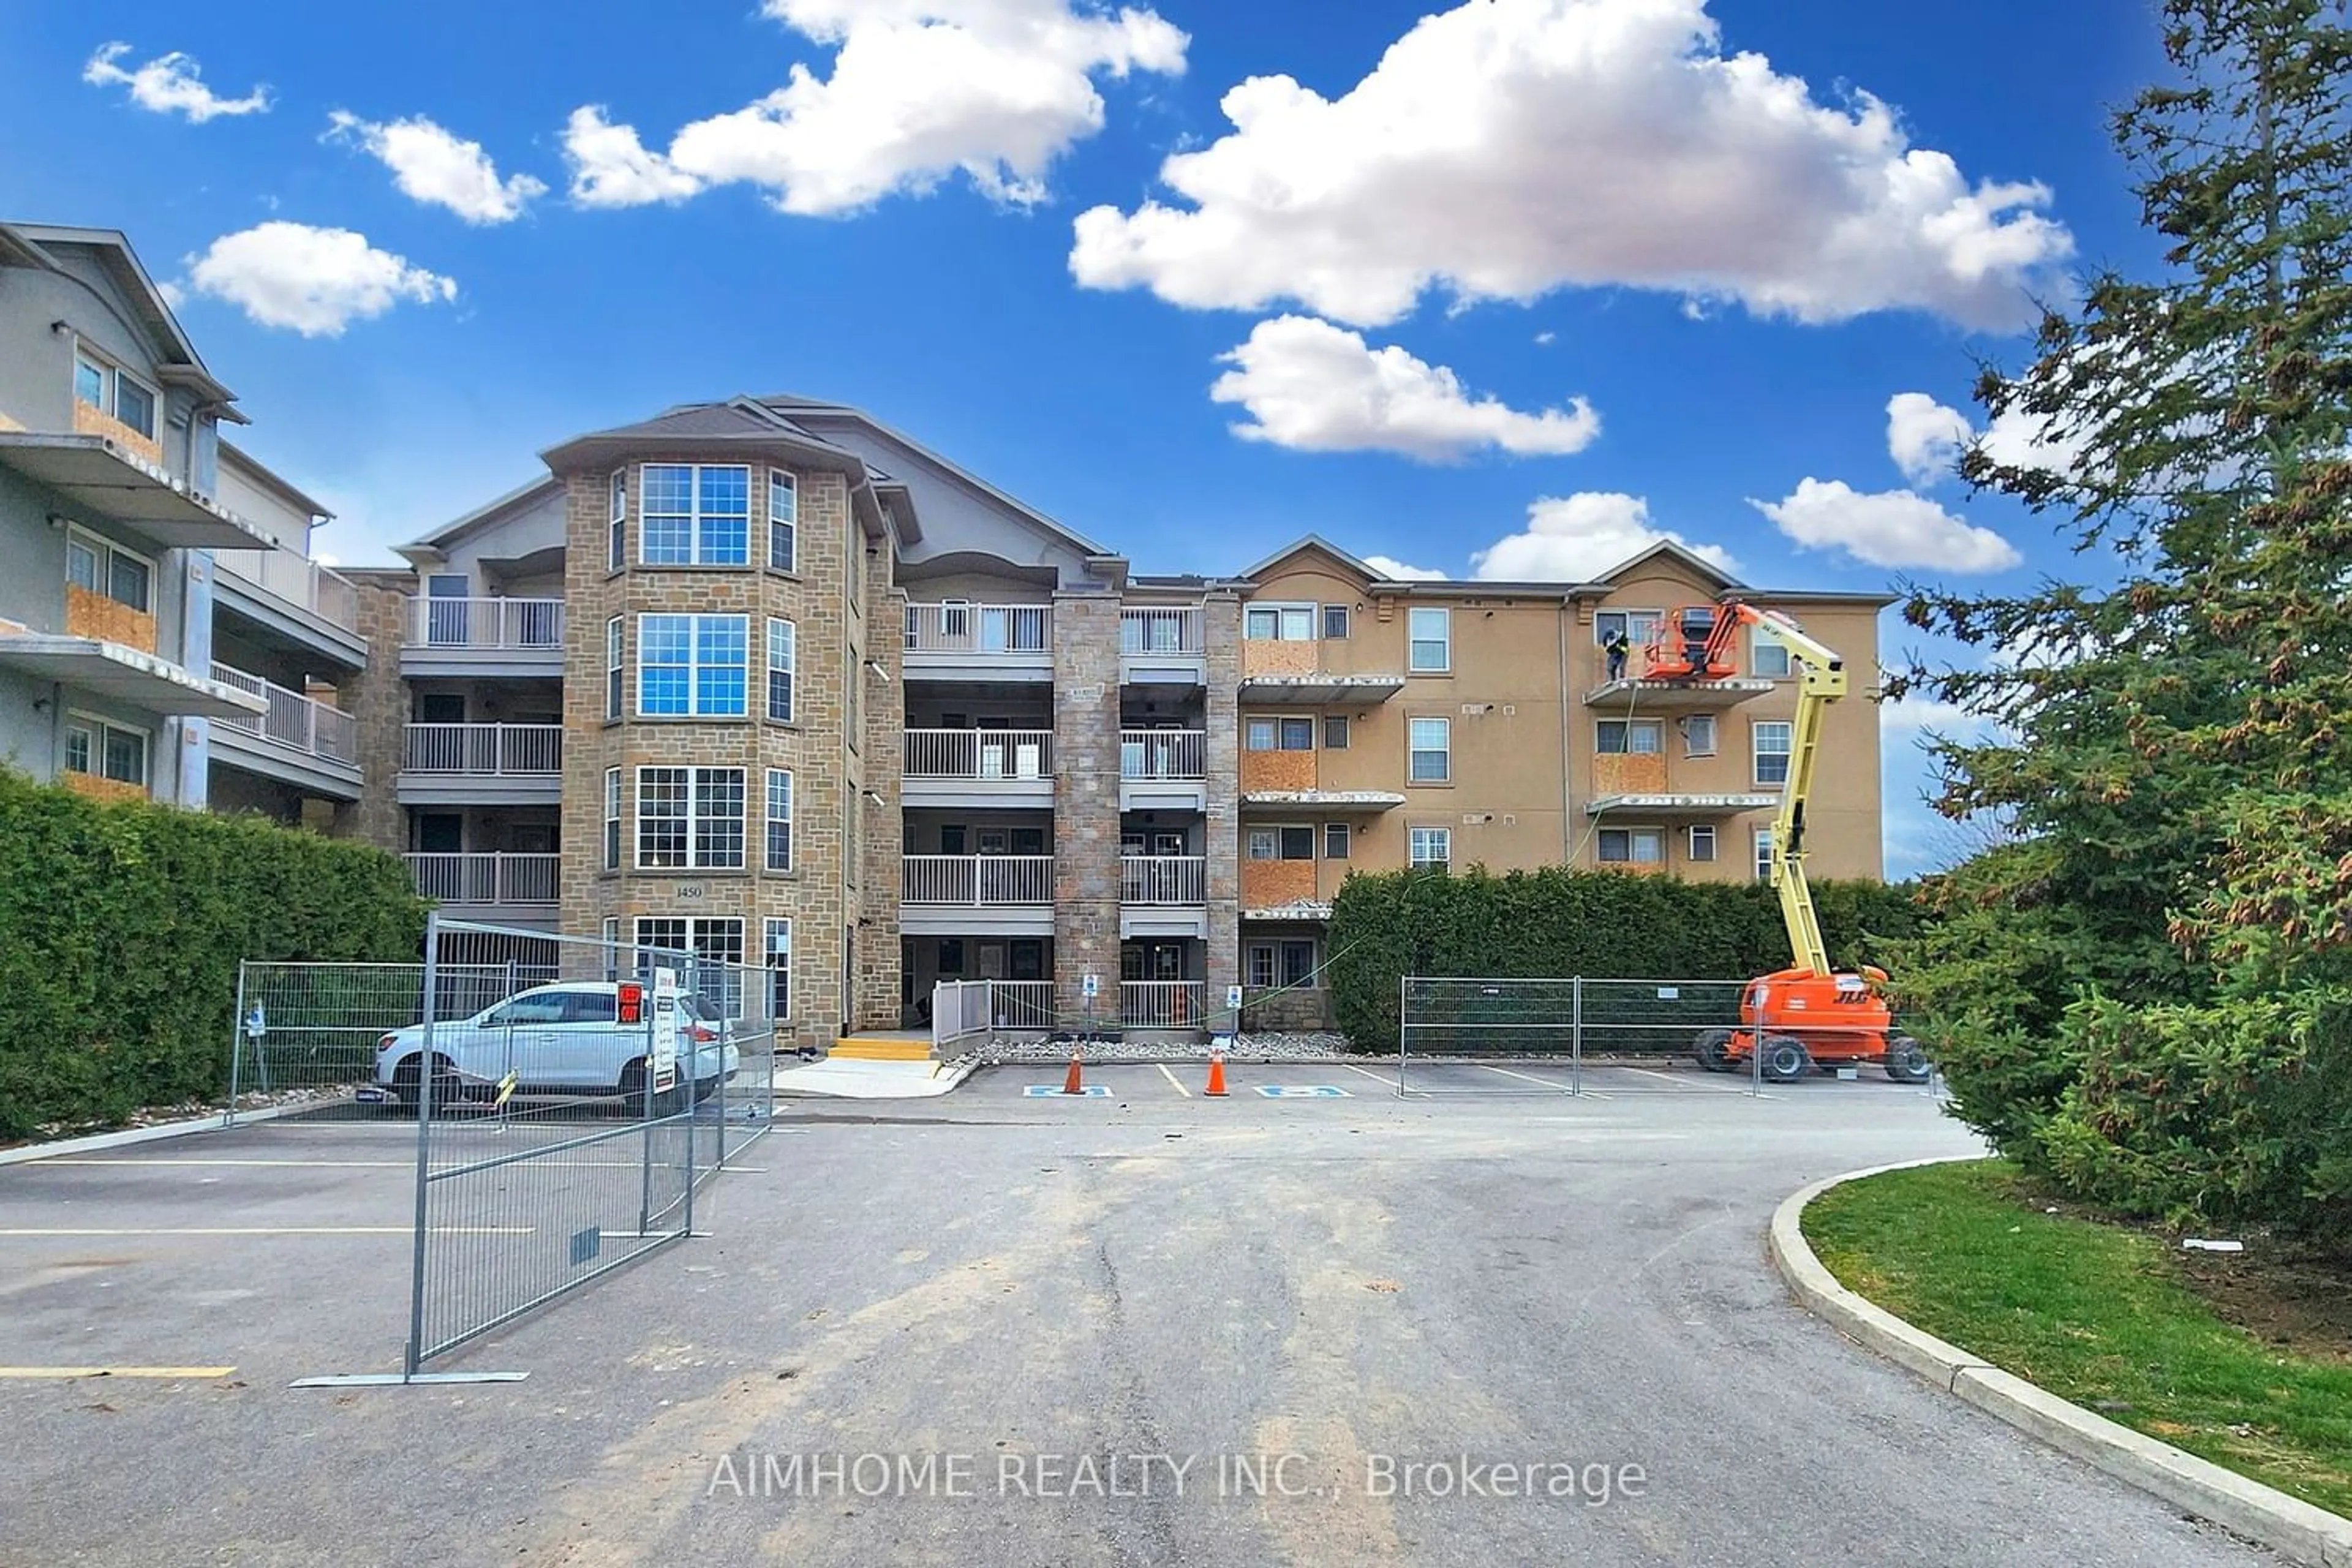 Home with vinyl exterior material for 1450 Bishops Gate #204, Oakville Ontario L6M 4M9